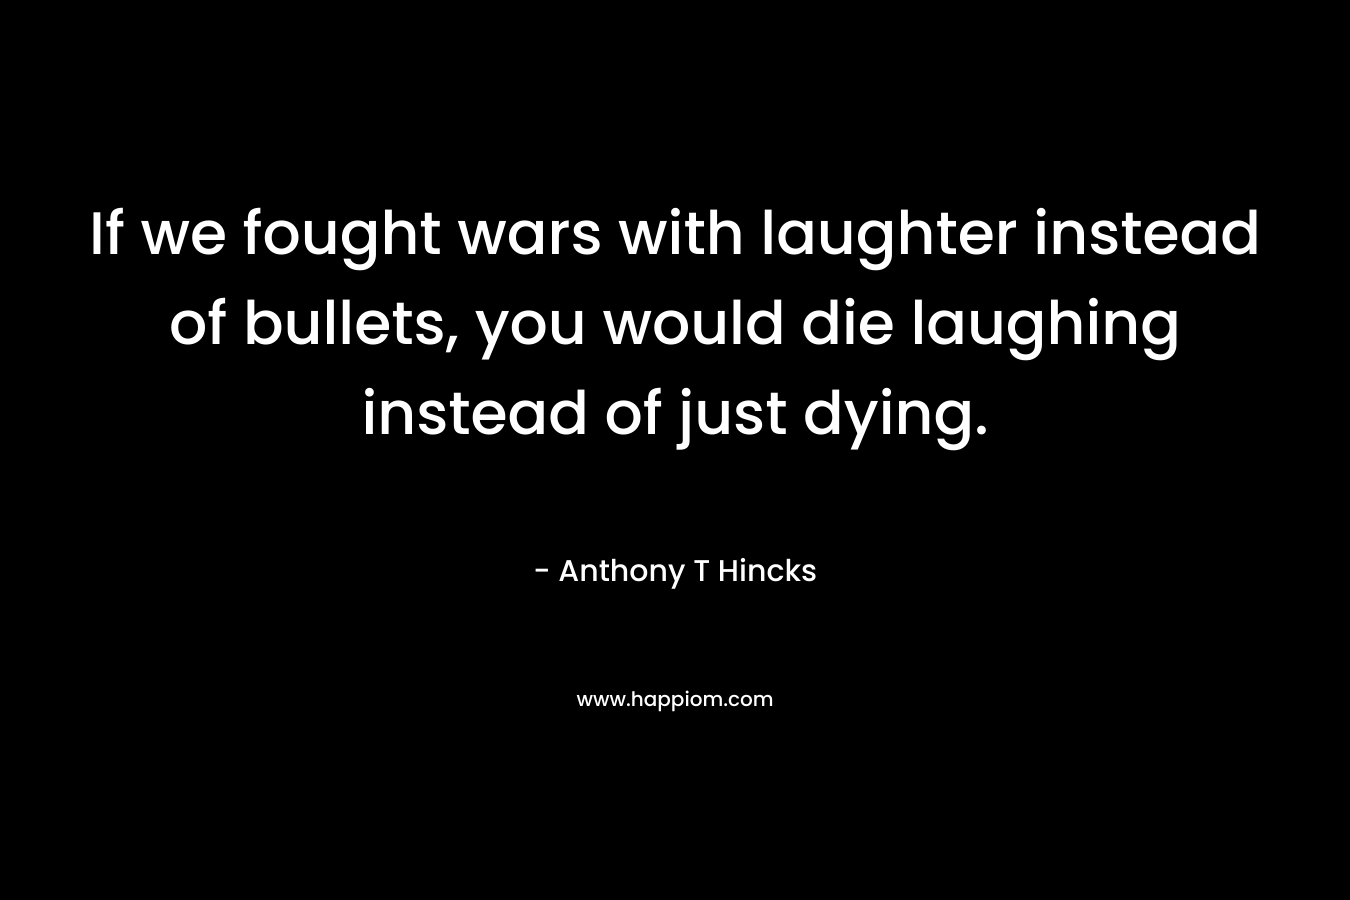 If we fought wars with laughter instead of bullets, you would die laughing instead of just dying. – Anthony T Hincks